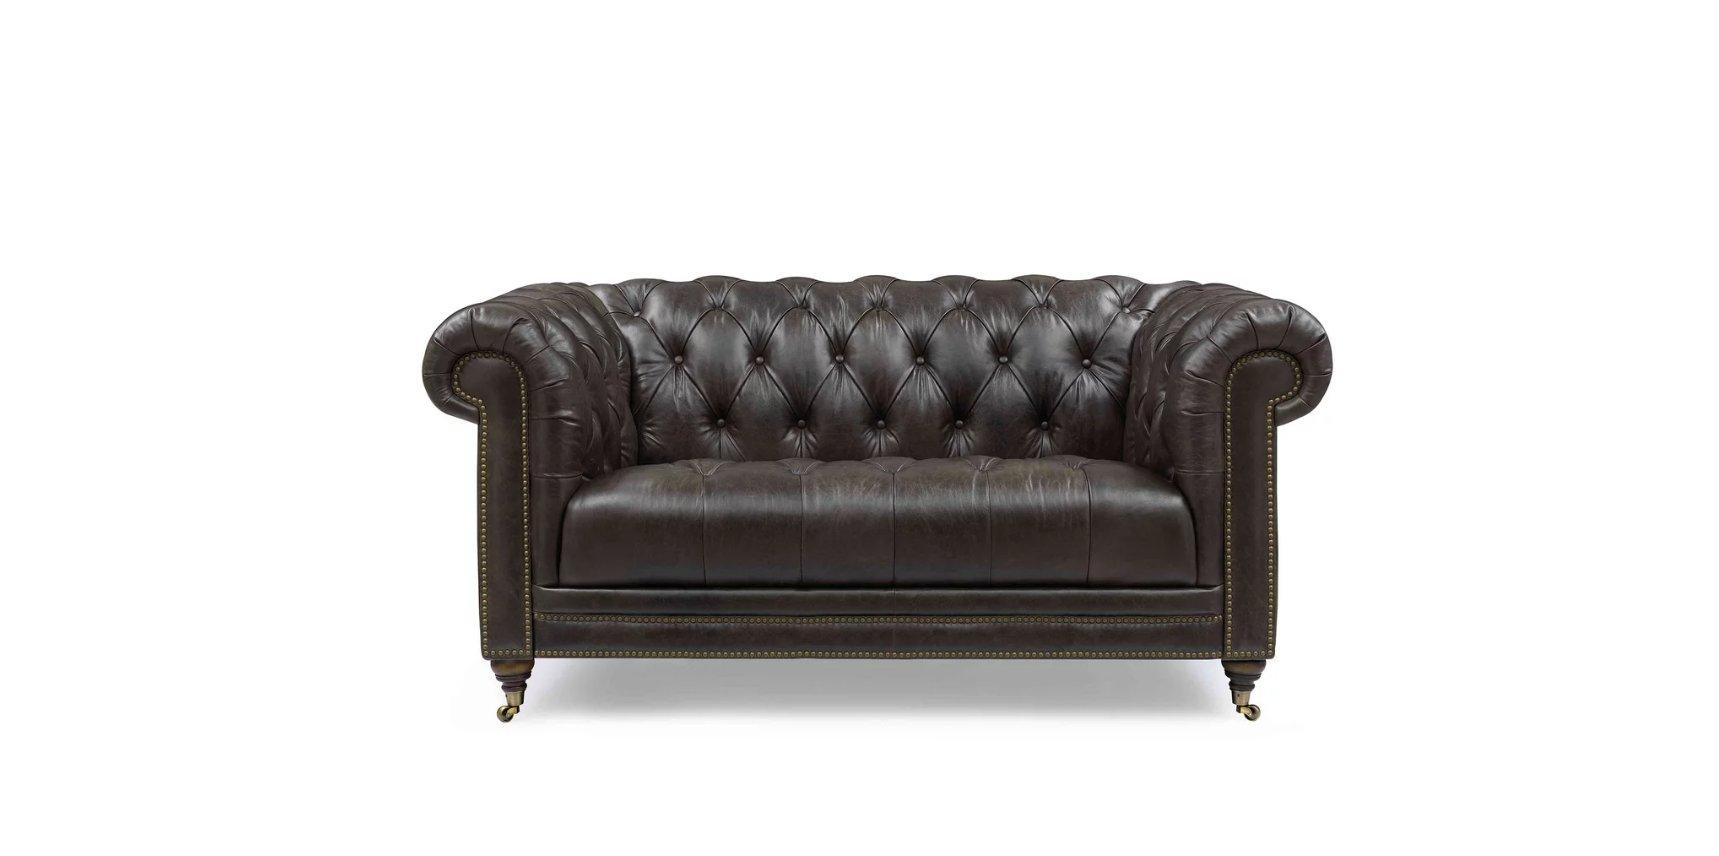 Walter 2 Seater Leather Chesterfield Sofa with USB-C in  on Furniture Village